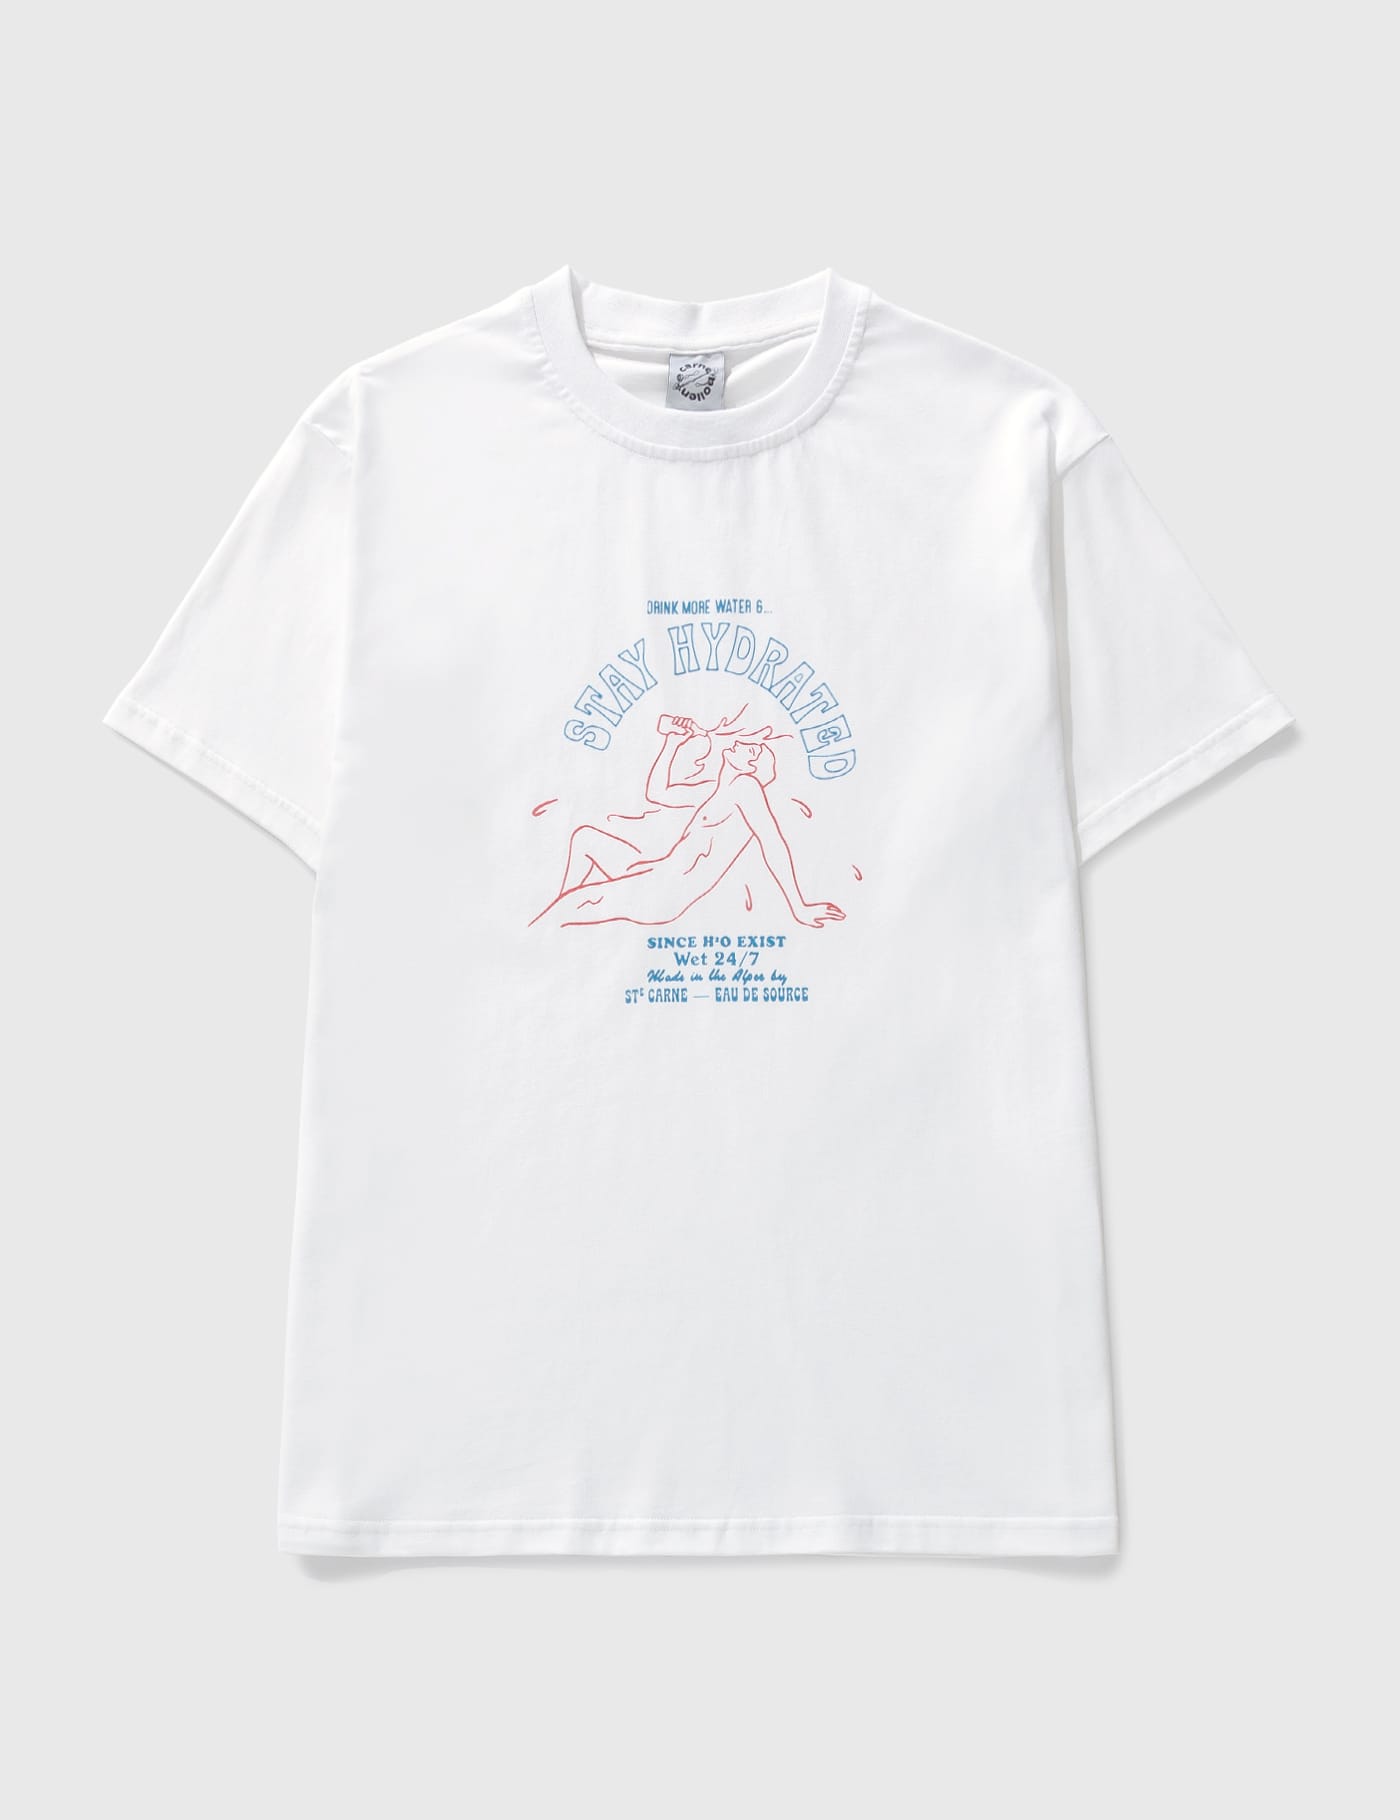 CARNE BOLLENTE - T-shirt 08 | HBX - Globally Curated Fashion and 